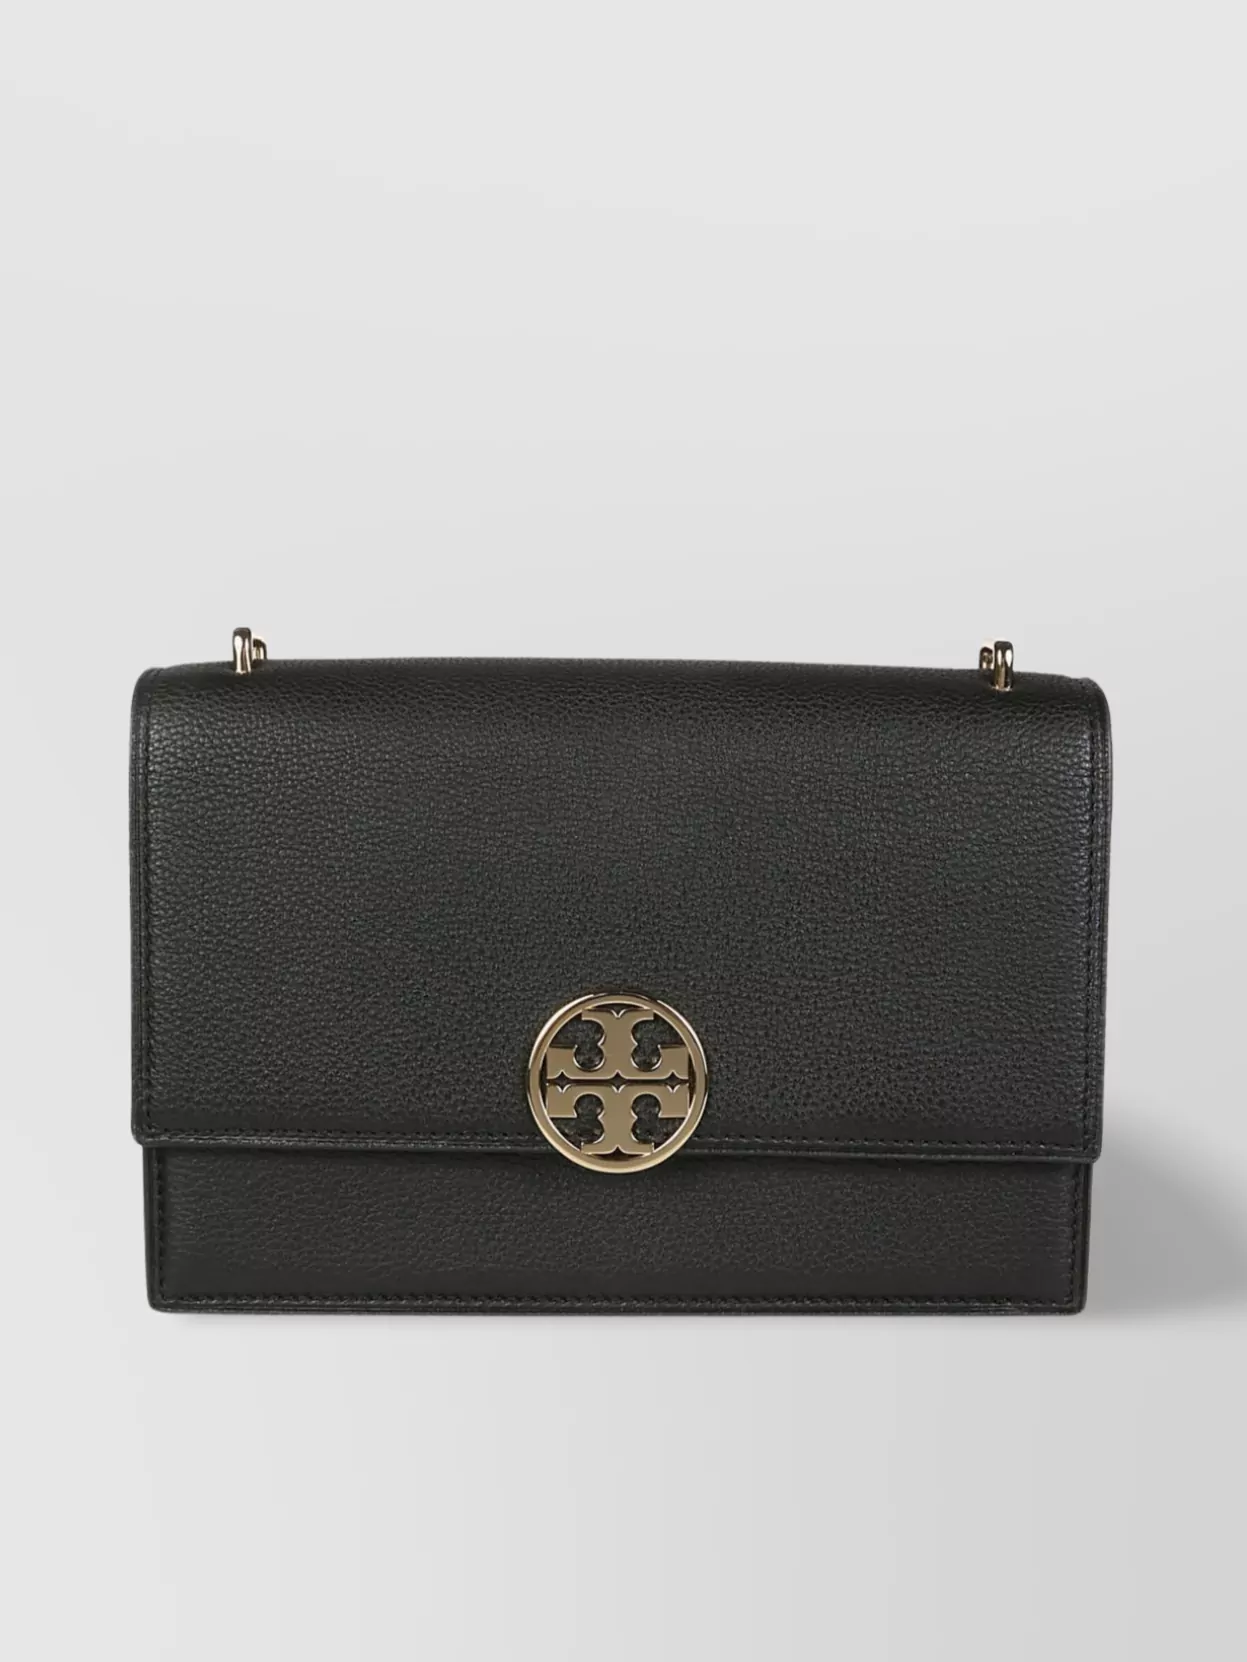 Tory Burch Leather Structured Cross-body Bag With Adjustable Strap In Black